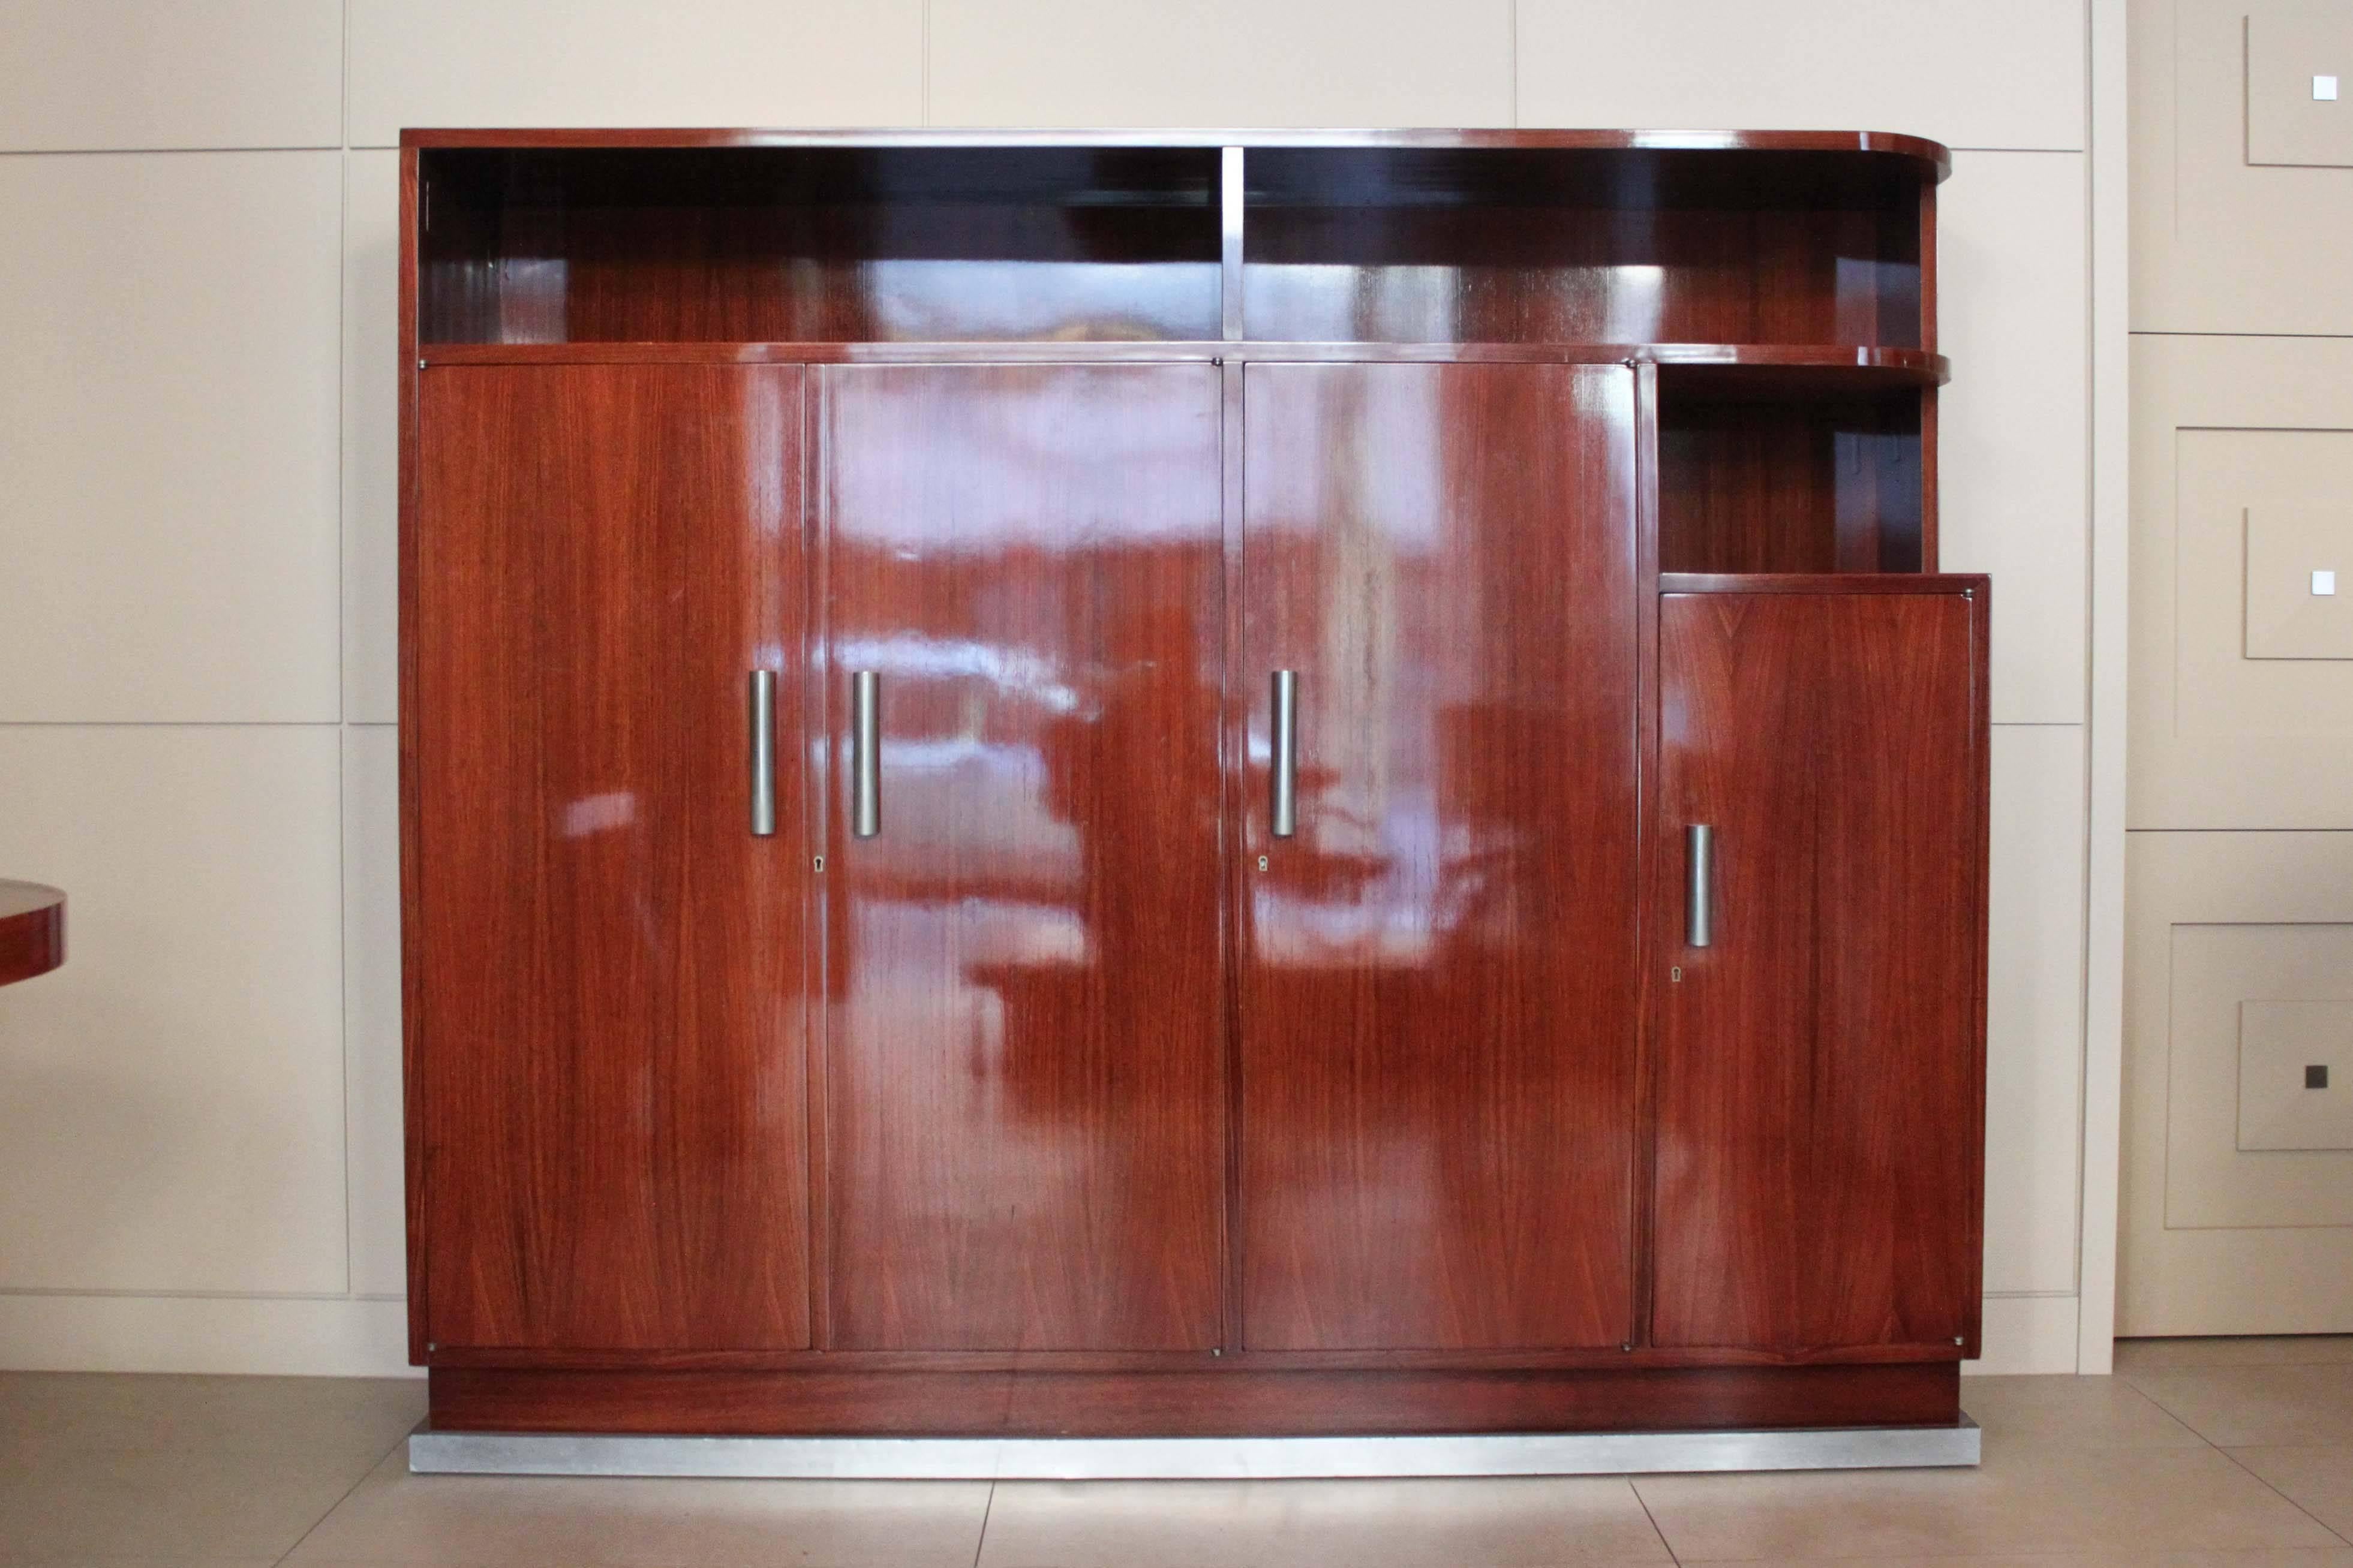 Beautiful matched Art Deco desk and storage cabinet/bookcase with turned handles.
Measures:
Desk: 31.5